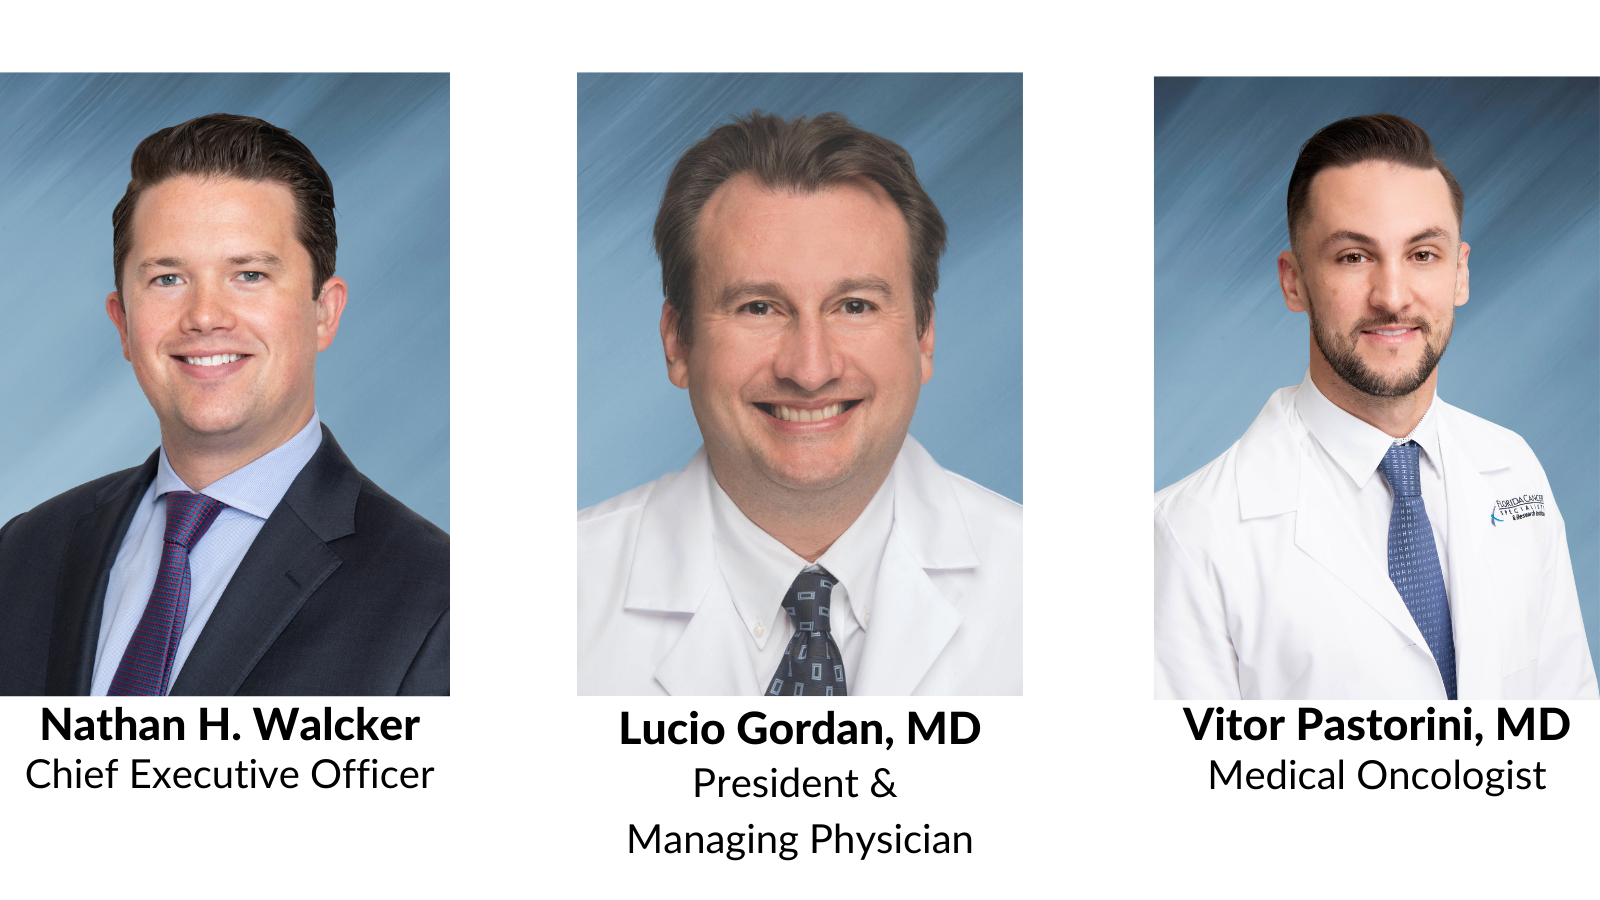 Chief Executive Officer Nathan H. Walcker; President & Managing Physician Lucio Gordan, MD; Medical Oncologist Vitor Pastorini, MD